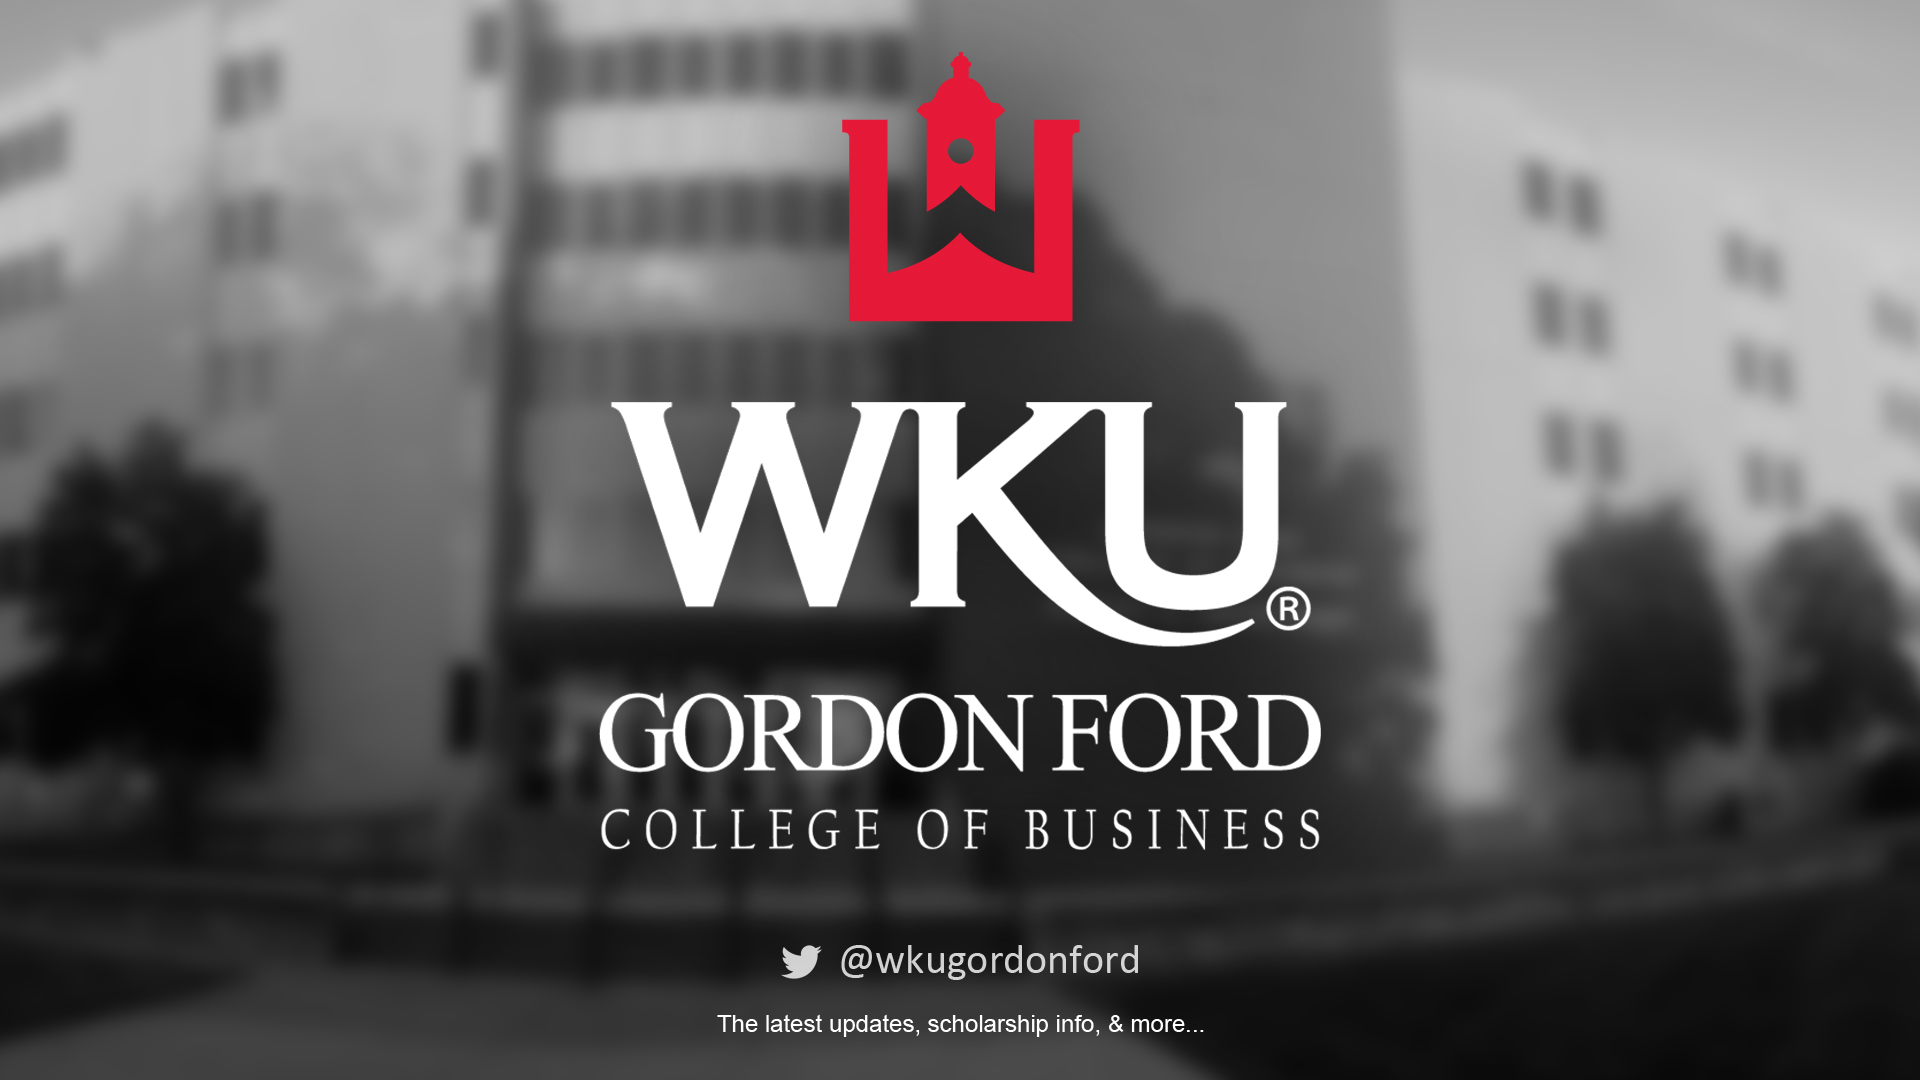 Gordon Ford College of Business